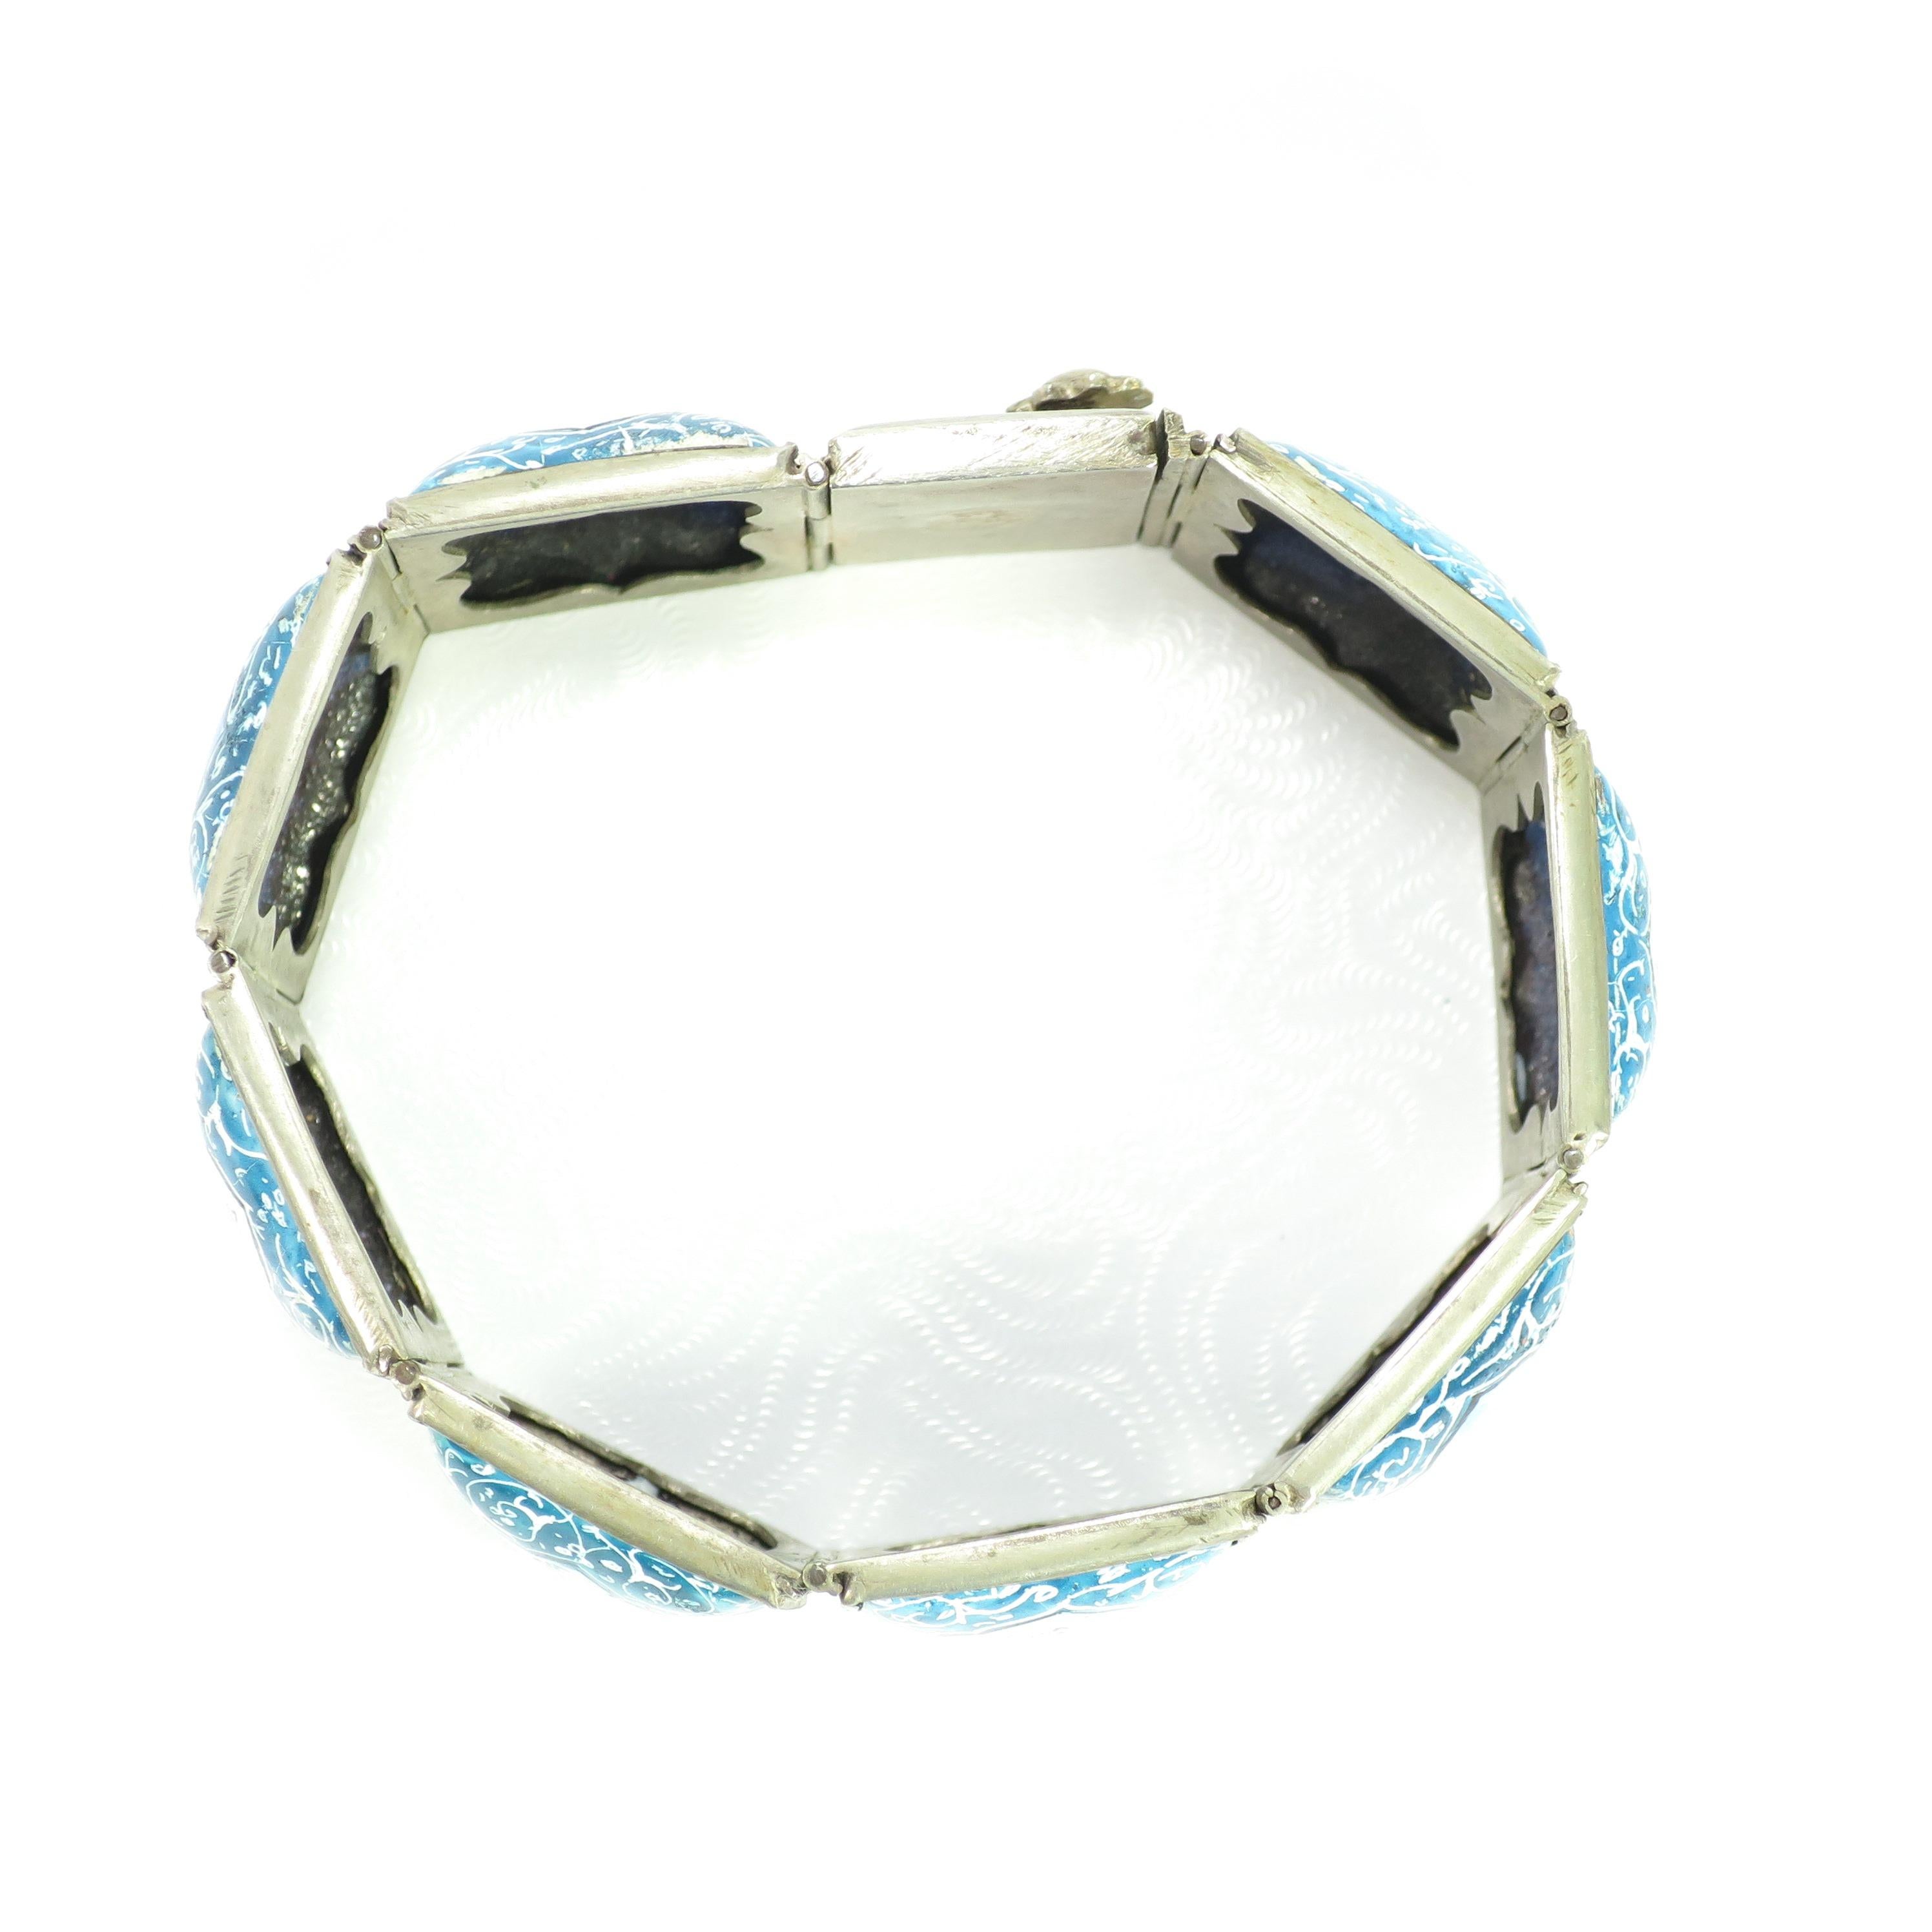 Persian Isfahan Silver Enamel Articulated Panel Bracelet, Artist-Signed 1930s For Sale 7